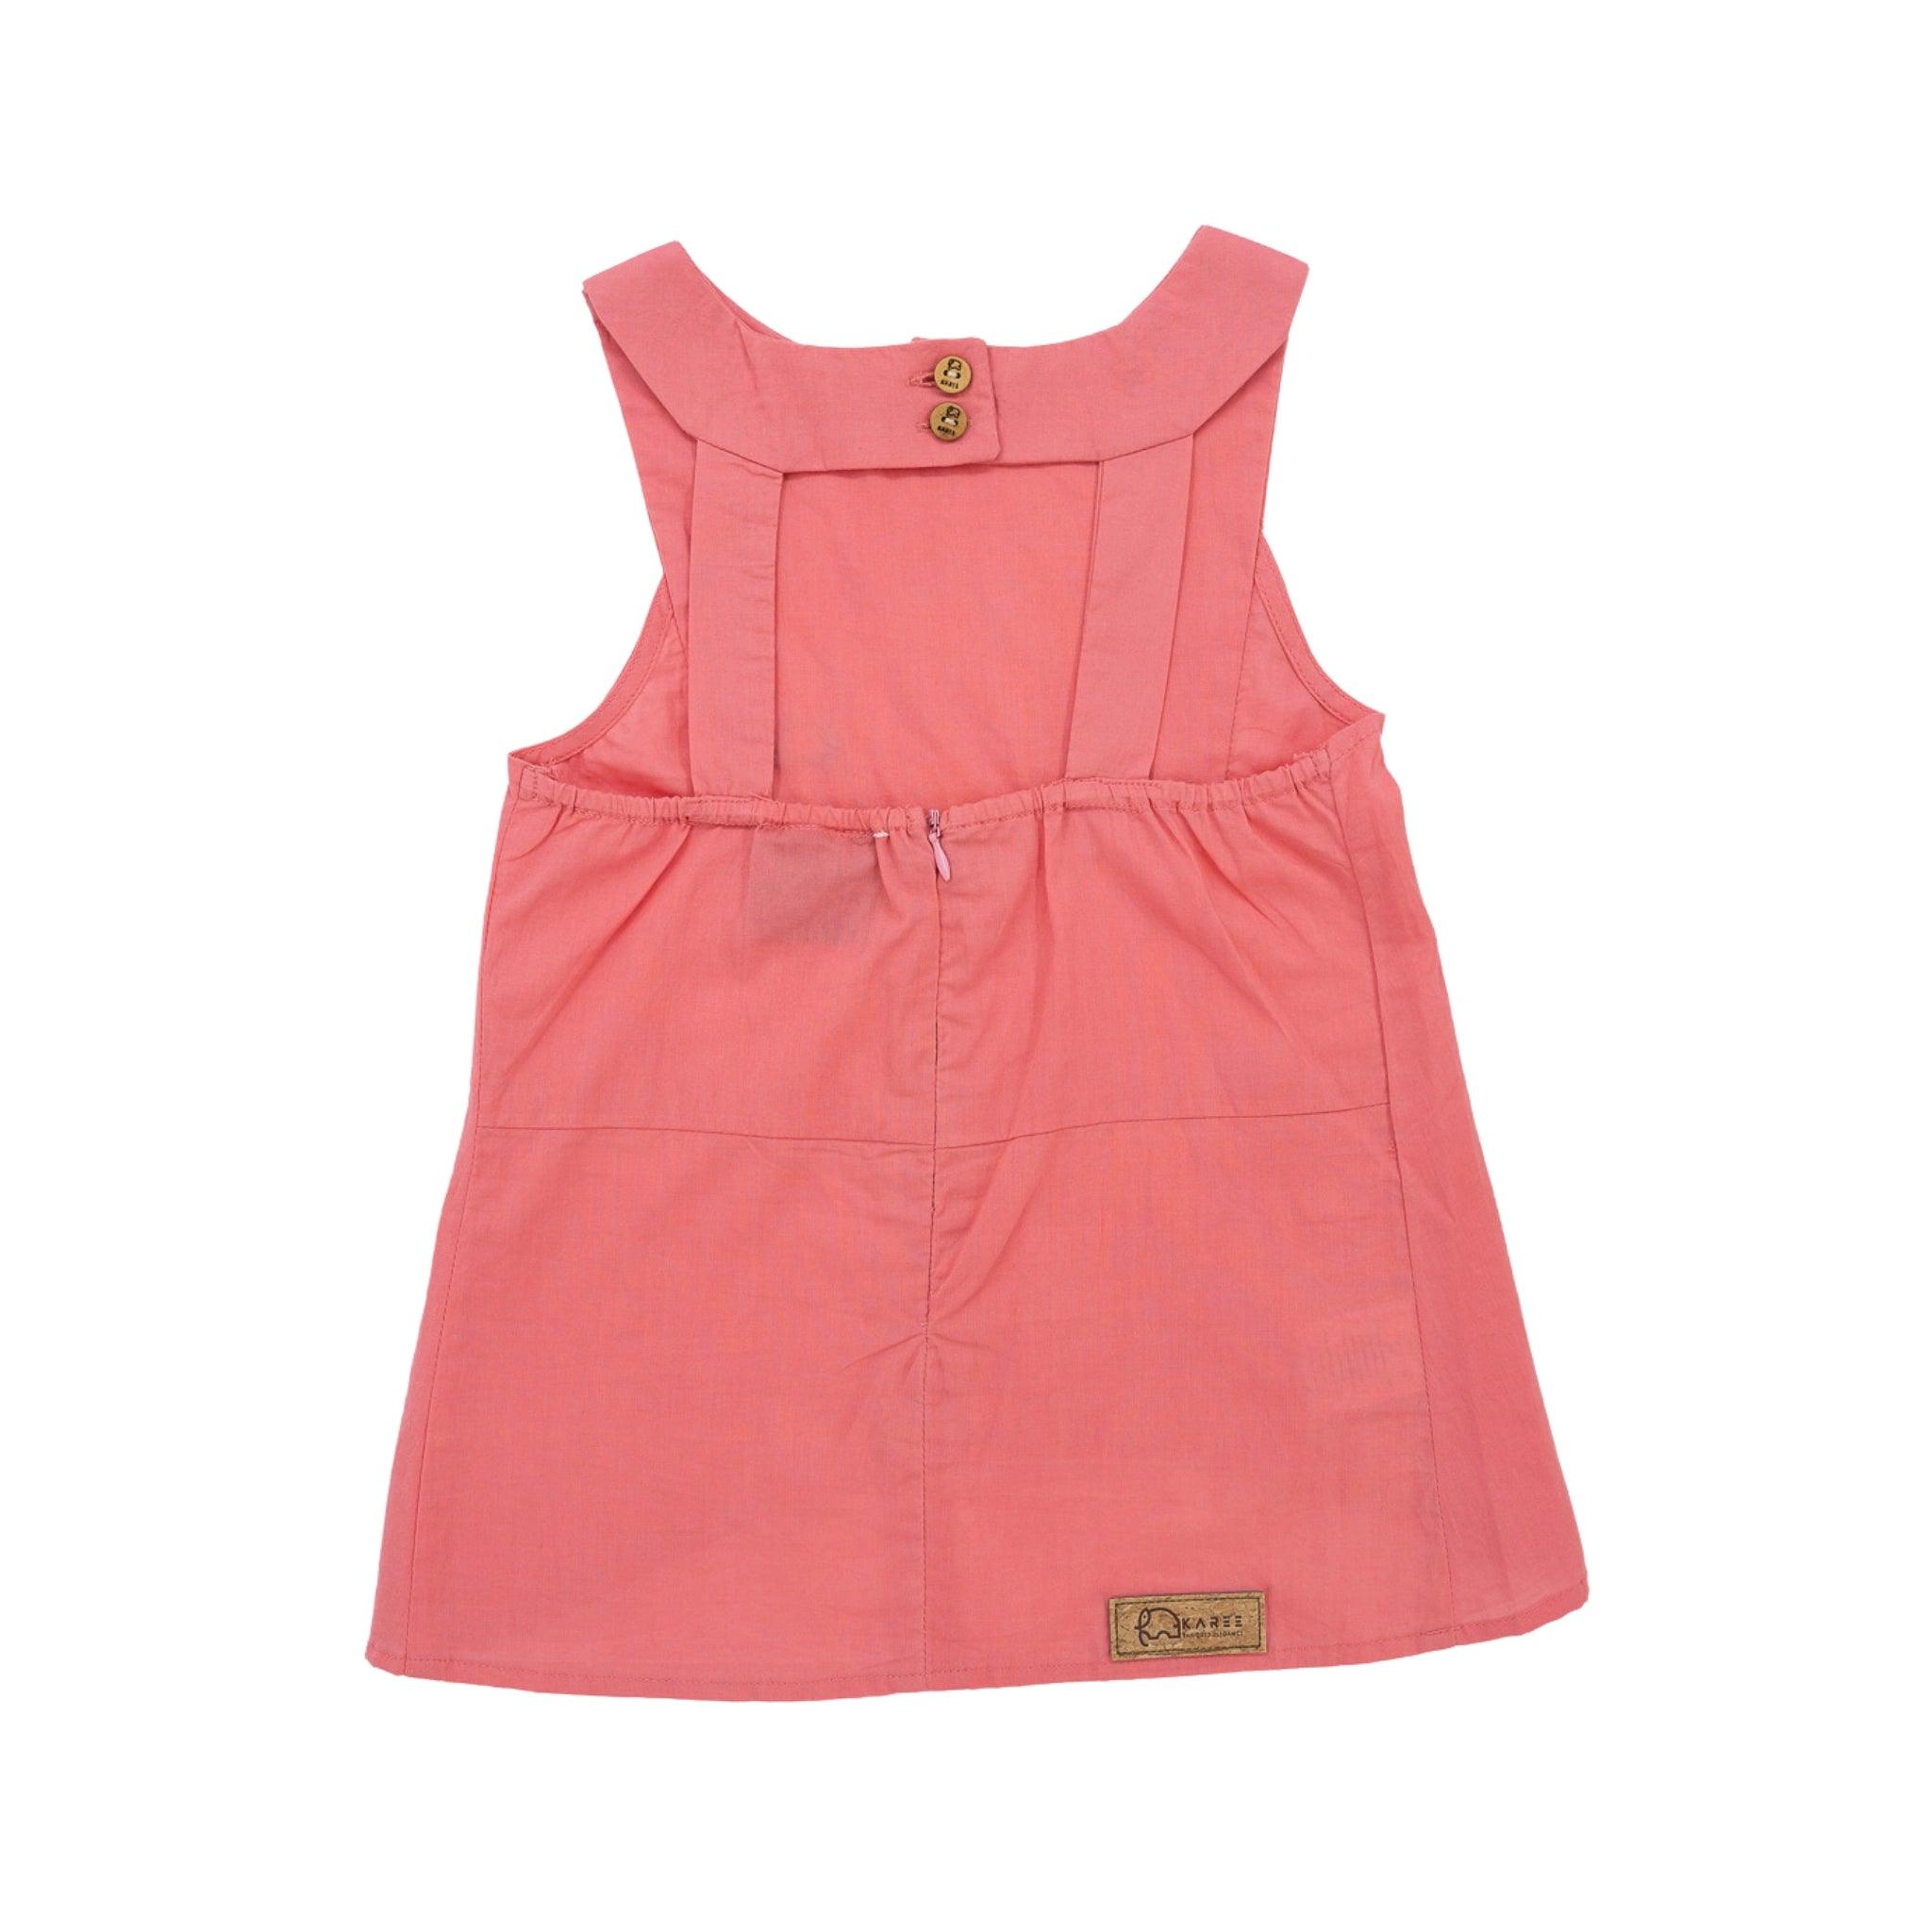 Tea Rose Cotton Bib Neck Top for kids by Karee, with breathable cotton shoulder straps and button detail, displayed against a white background.